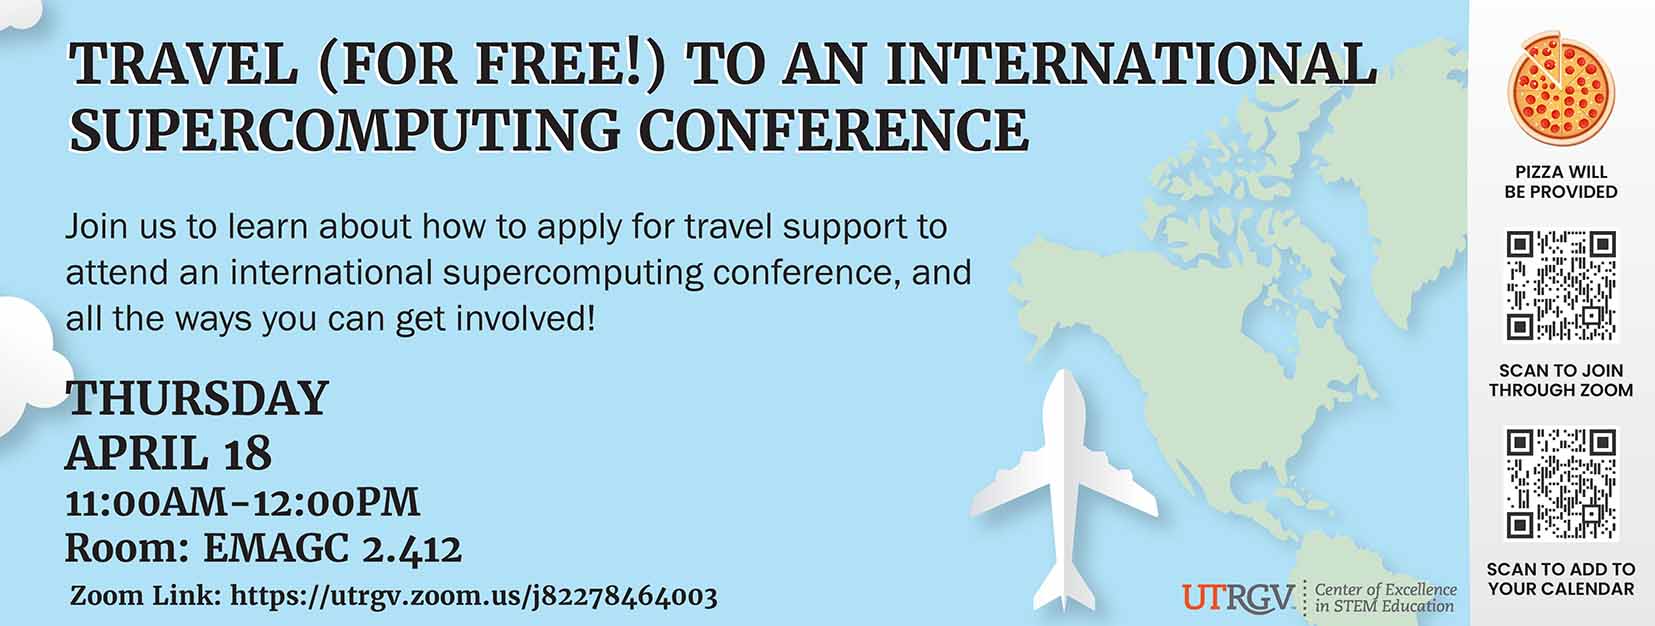 travel-to-international-conferences